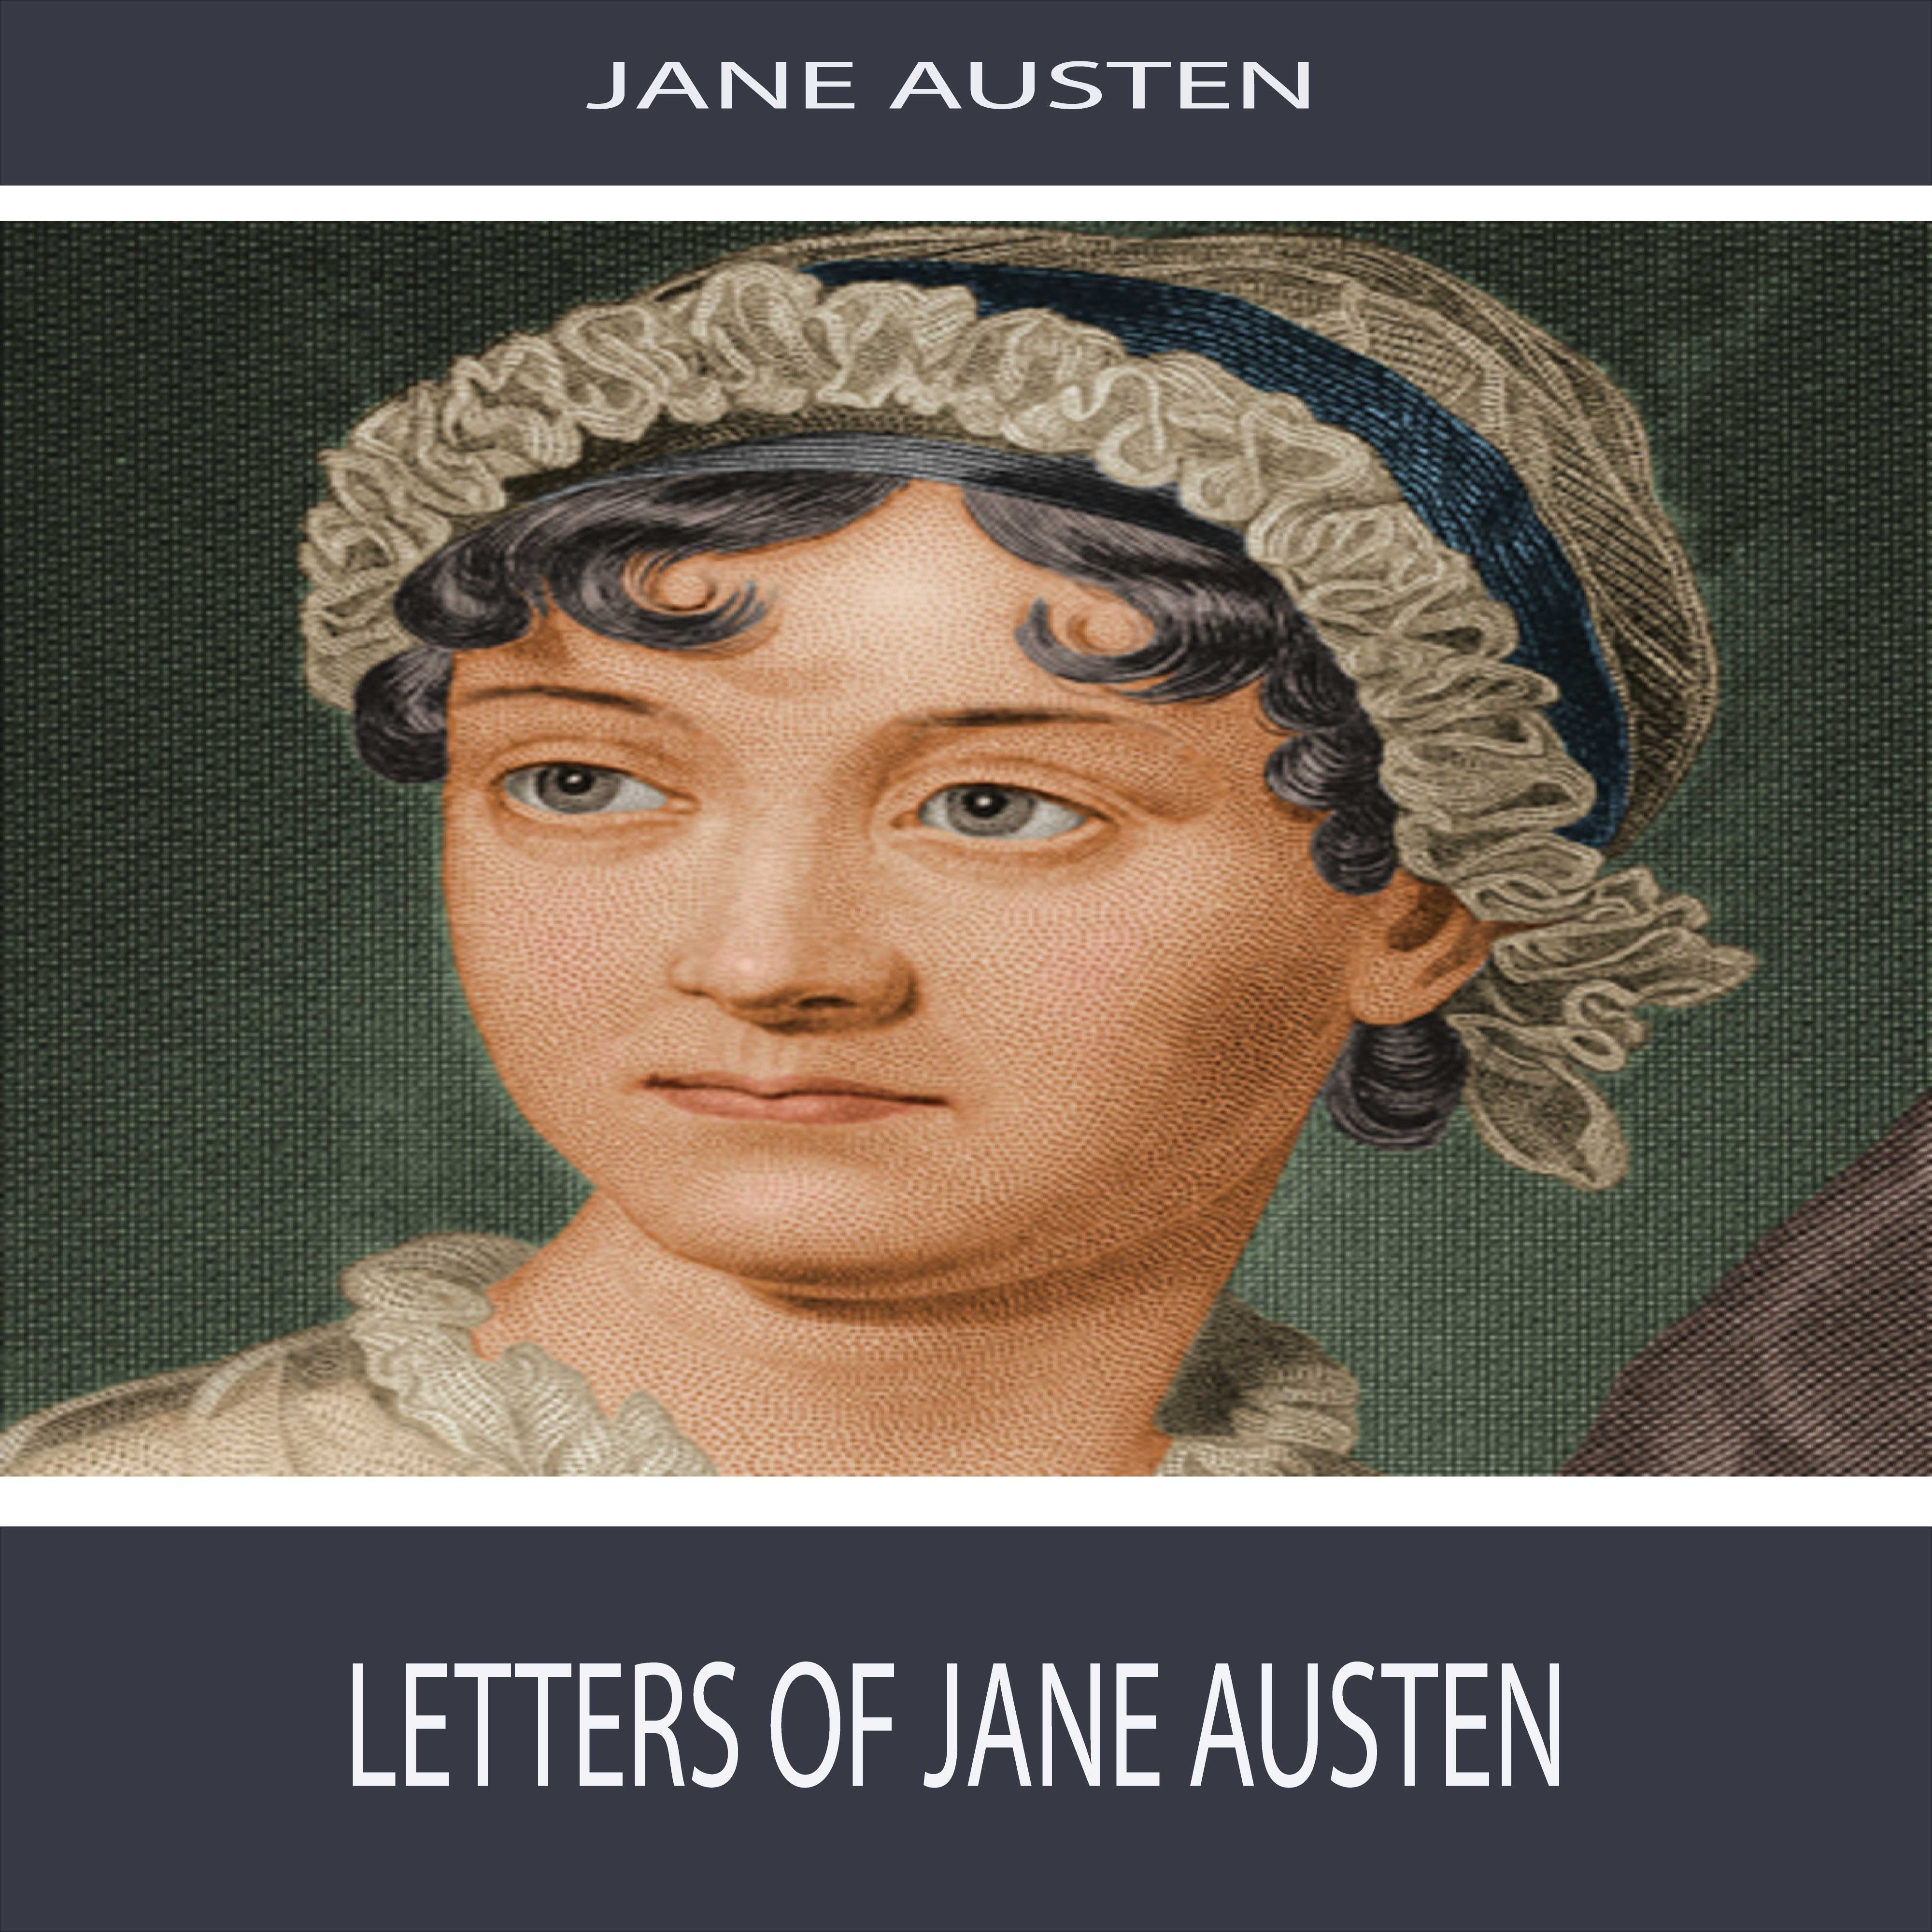 Letters of Jane Austen: Section 17